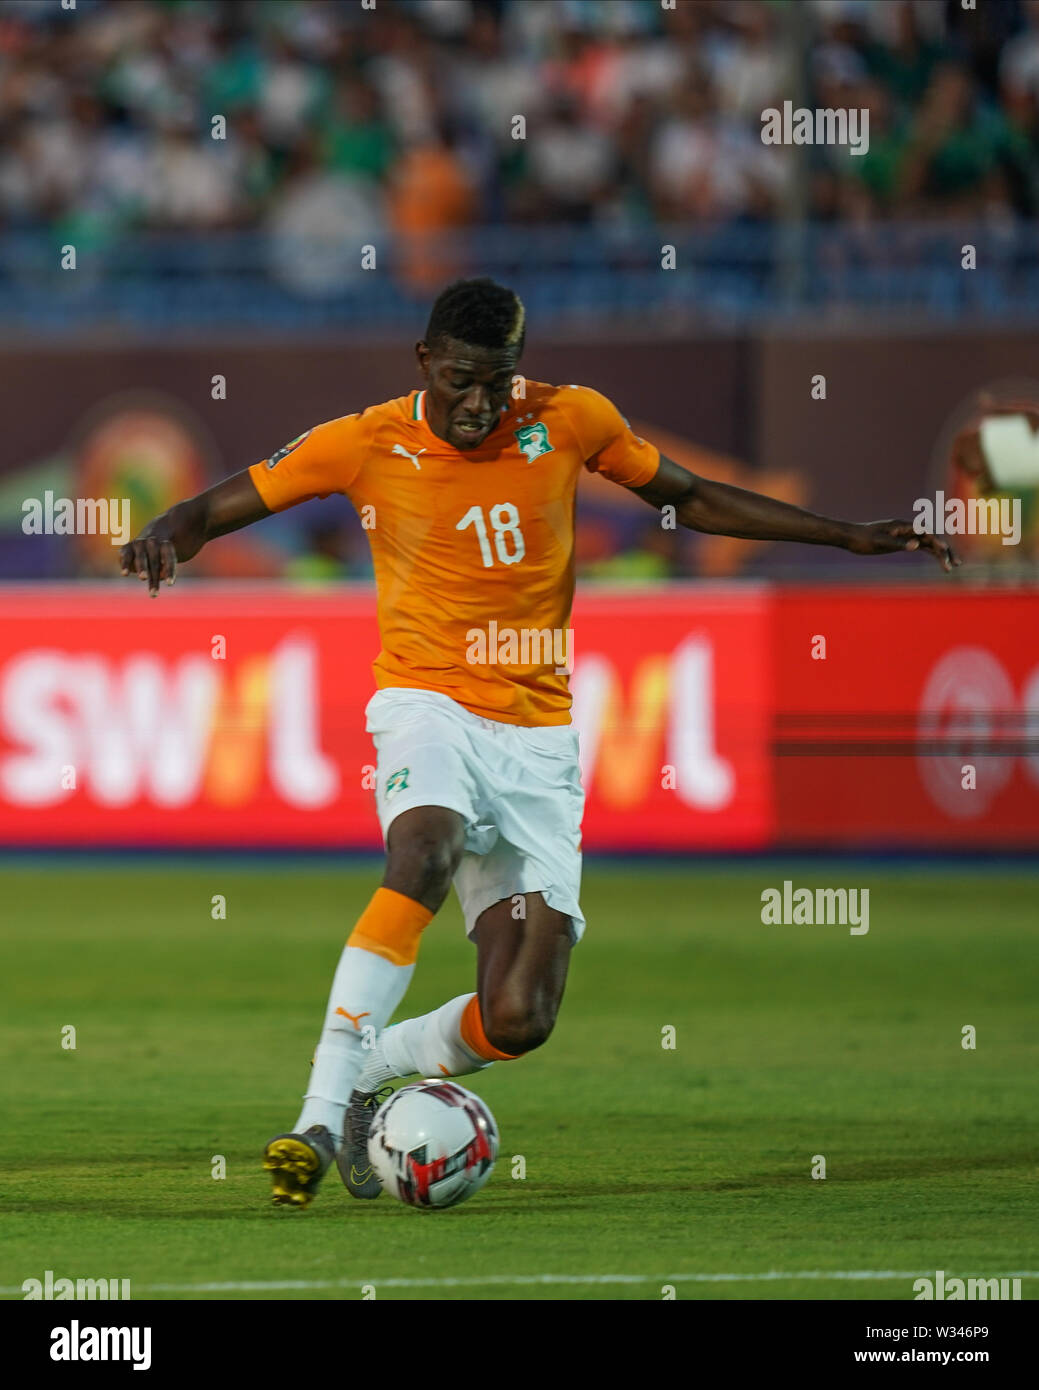 Suez, Egypt. 11th July, 2019. Ivory coast, Egypt - FRANCE OUT July 11, 2019: Ibrahim Sangare of Cote D'ivoire during the 2019 African Cup of Nations match between Ivory coast and Algeria at the Suez Stadium in Suez, Egypt. Ulrik Pedersen/CSM/Alamy Live News Stock Photo